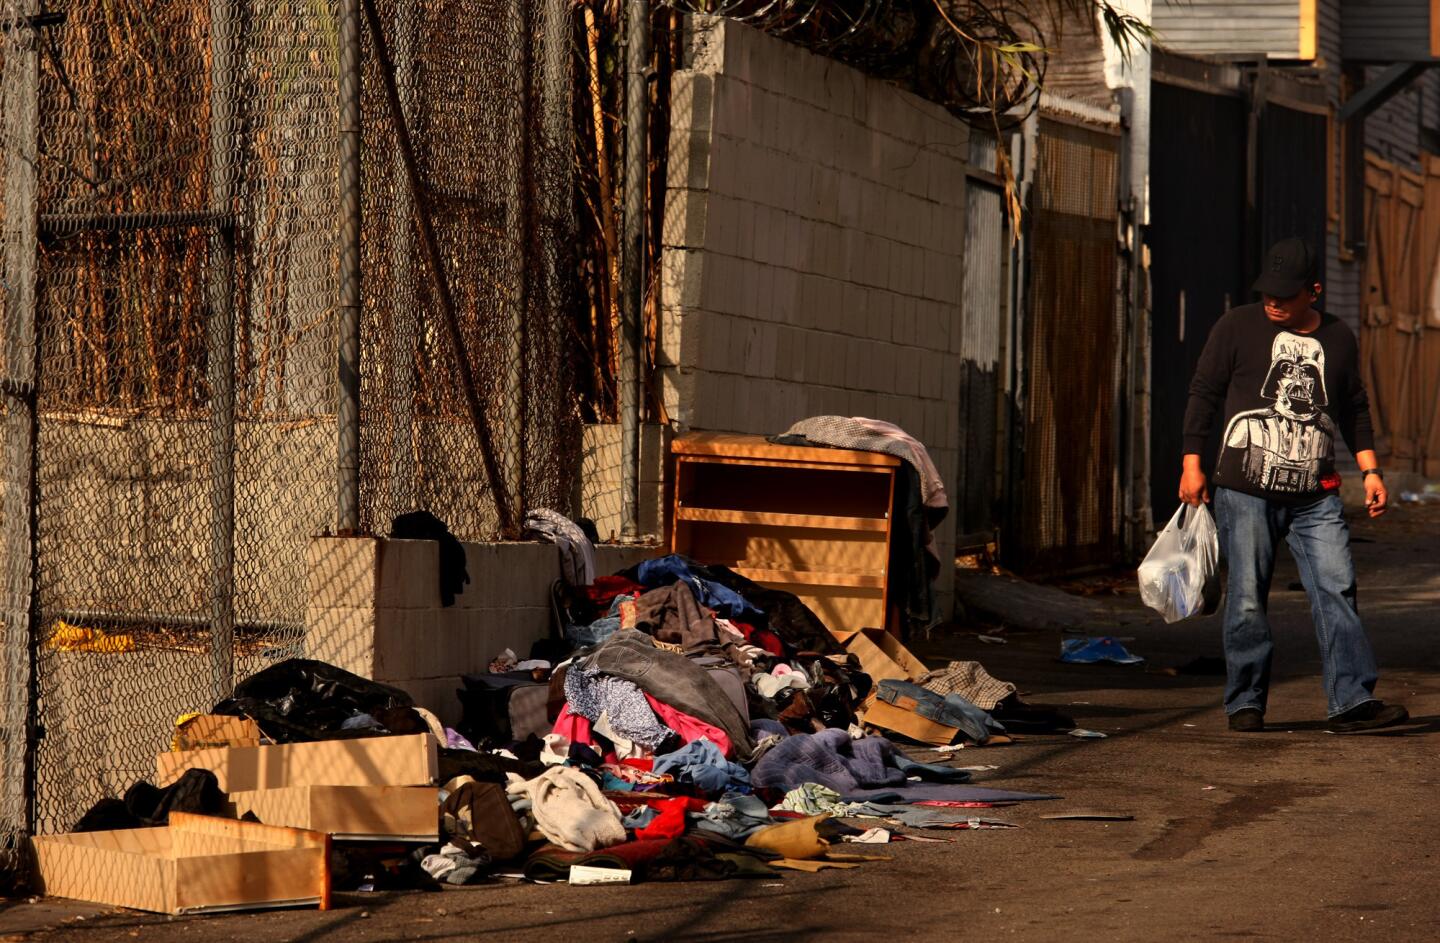 A pedestrian walks past furniture and clothing discarded in an alley in the Pico-Union neighborhood.